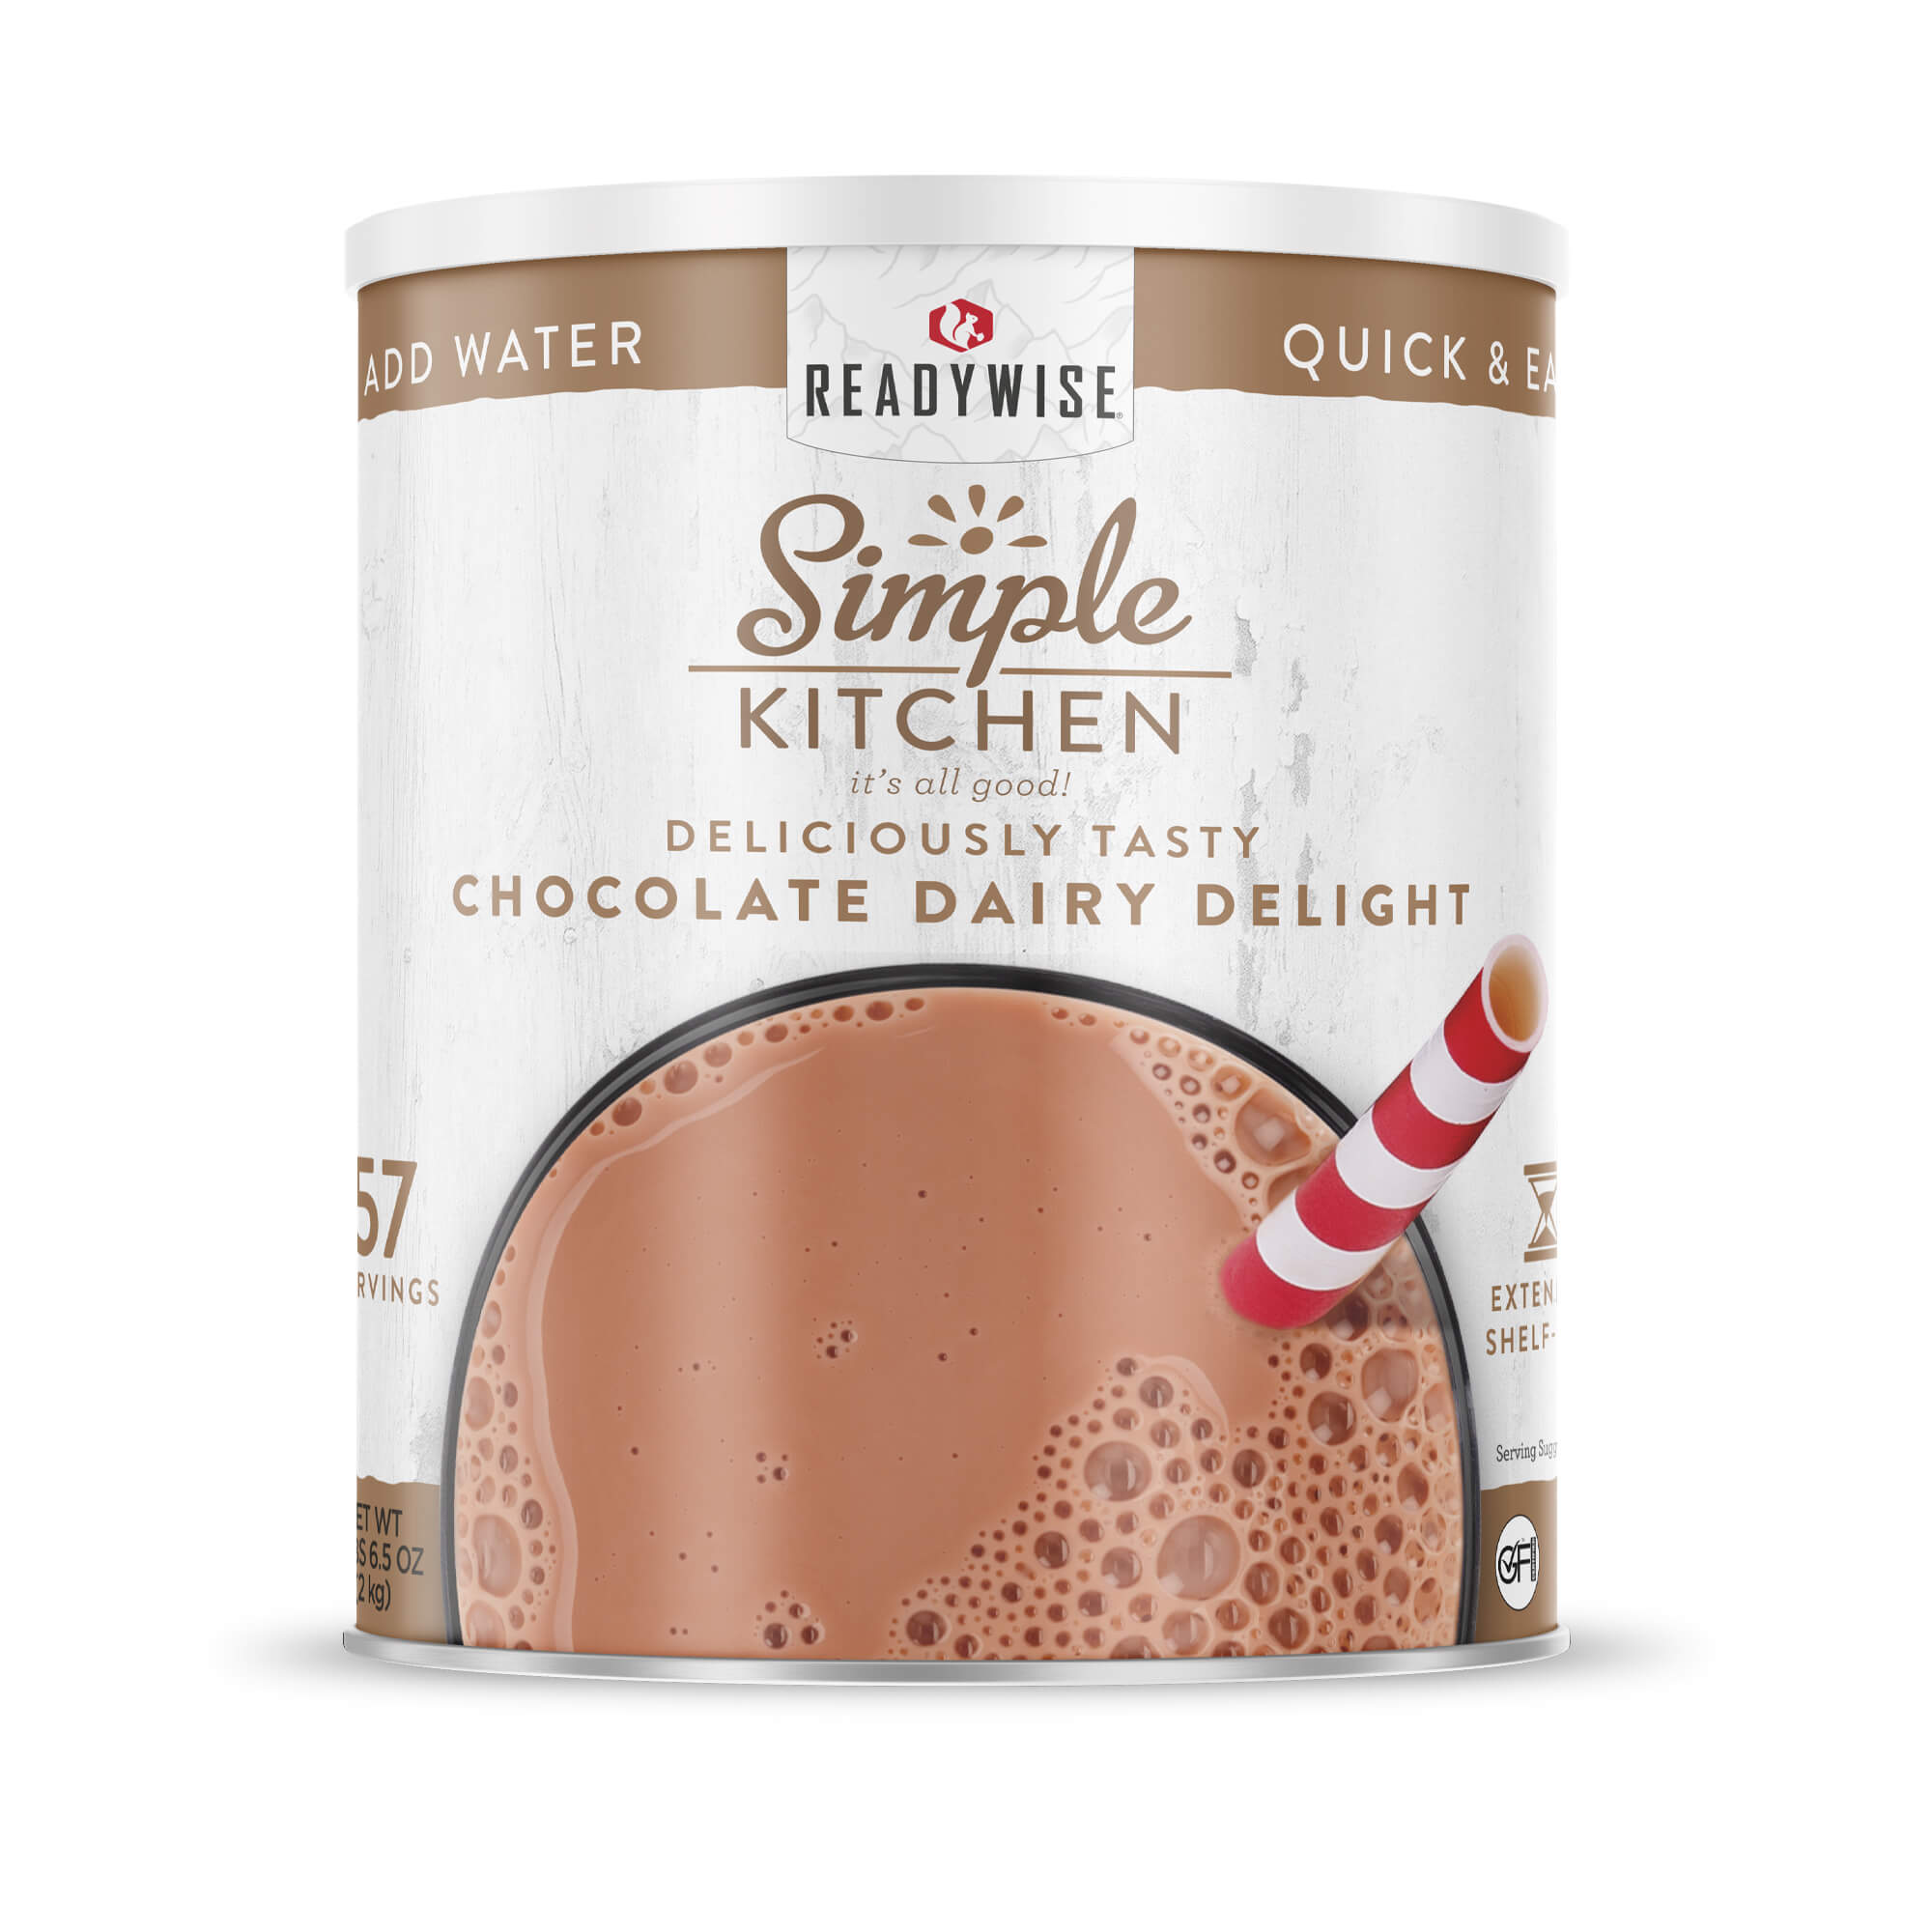 Buy 2, Get 1 Free - Chocolate Dairy Delight